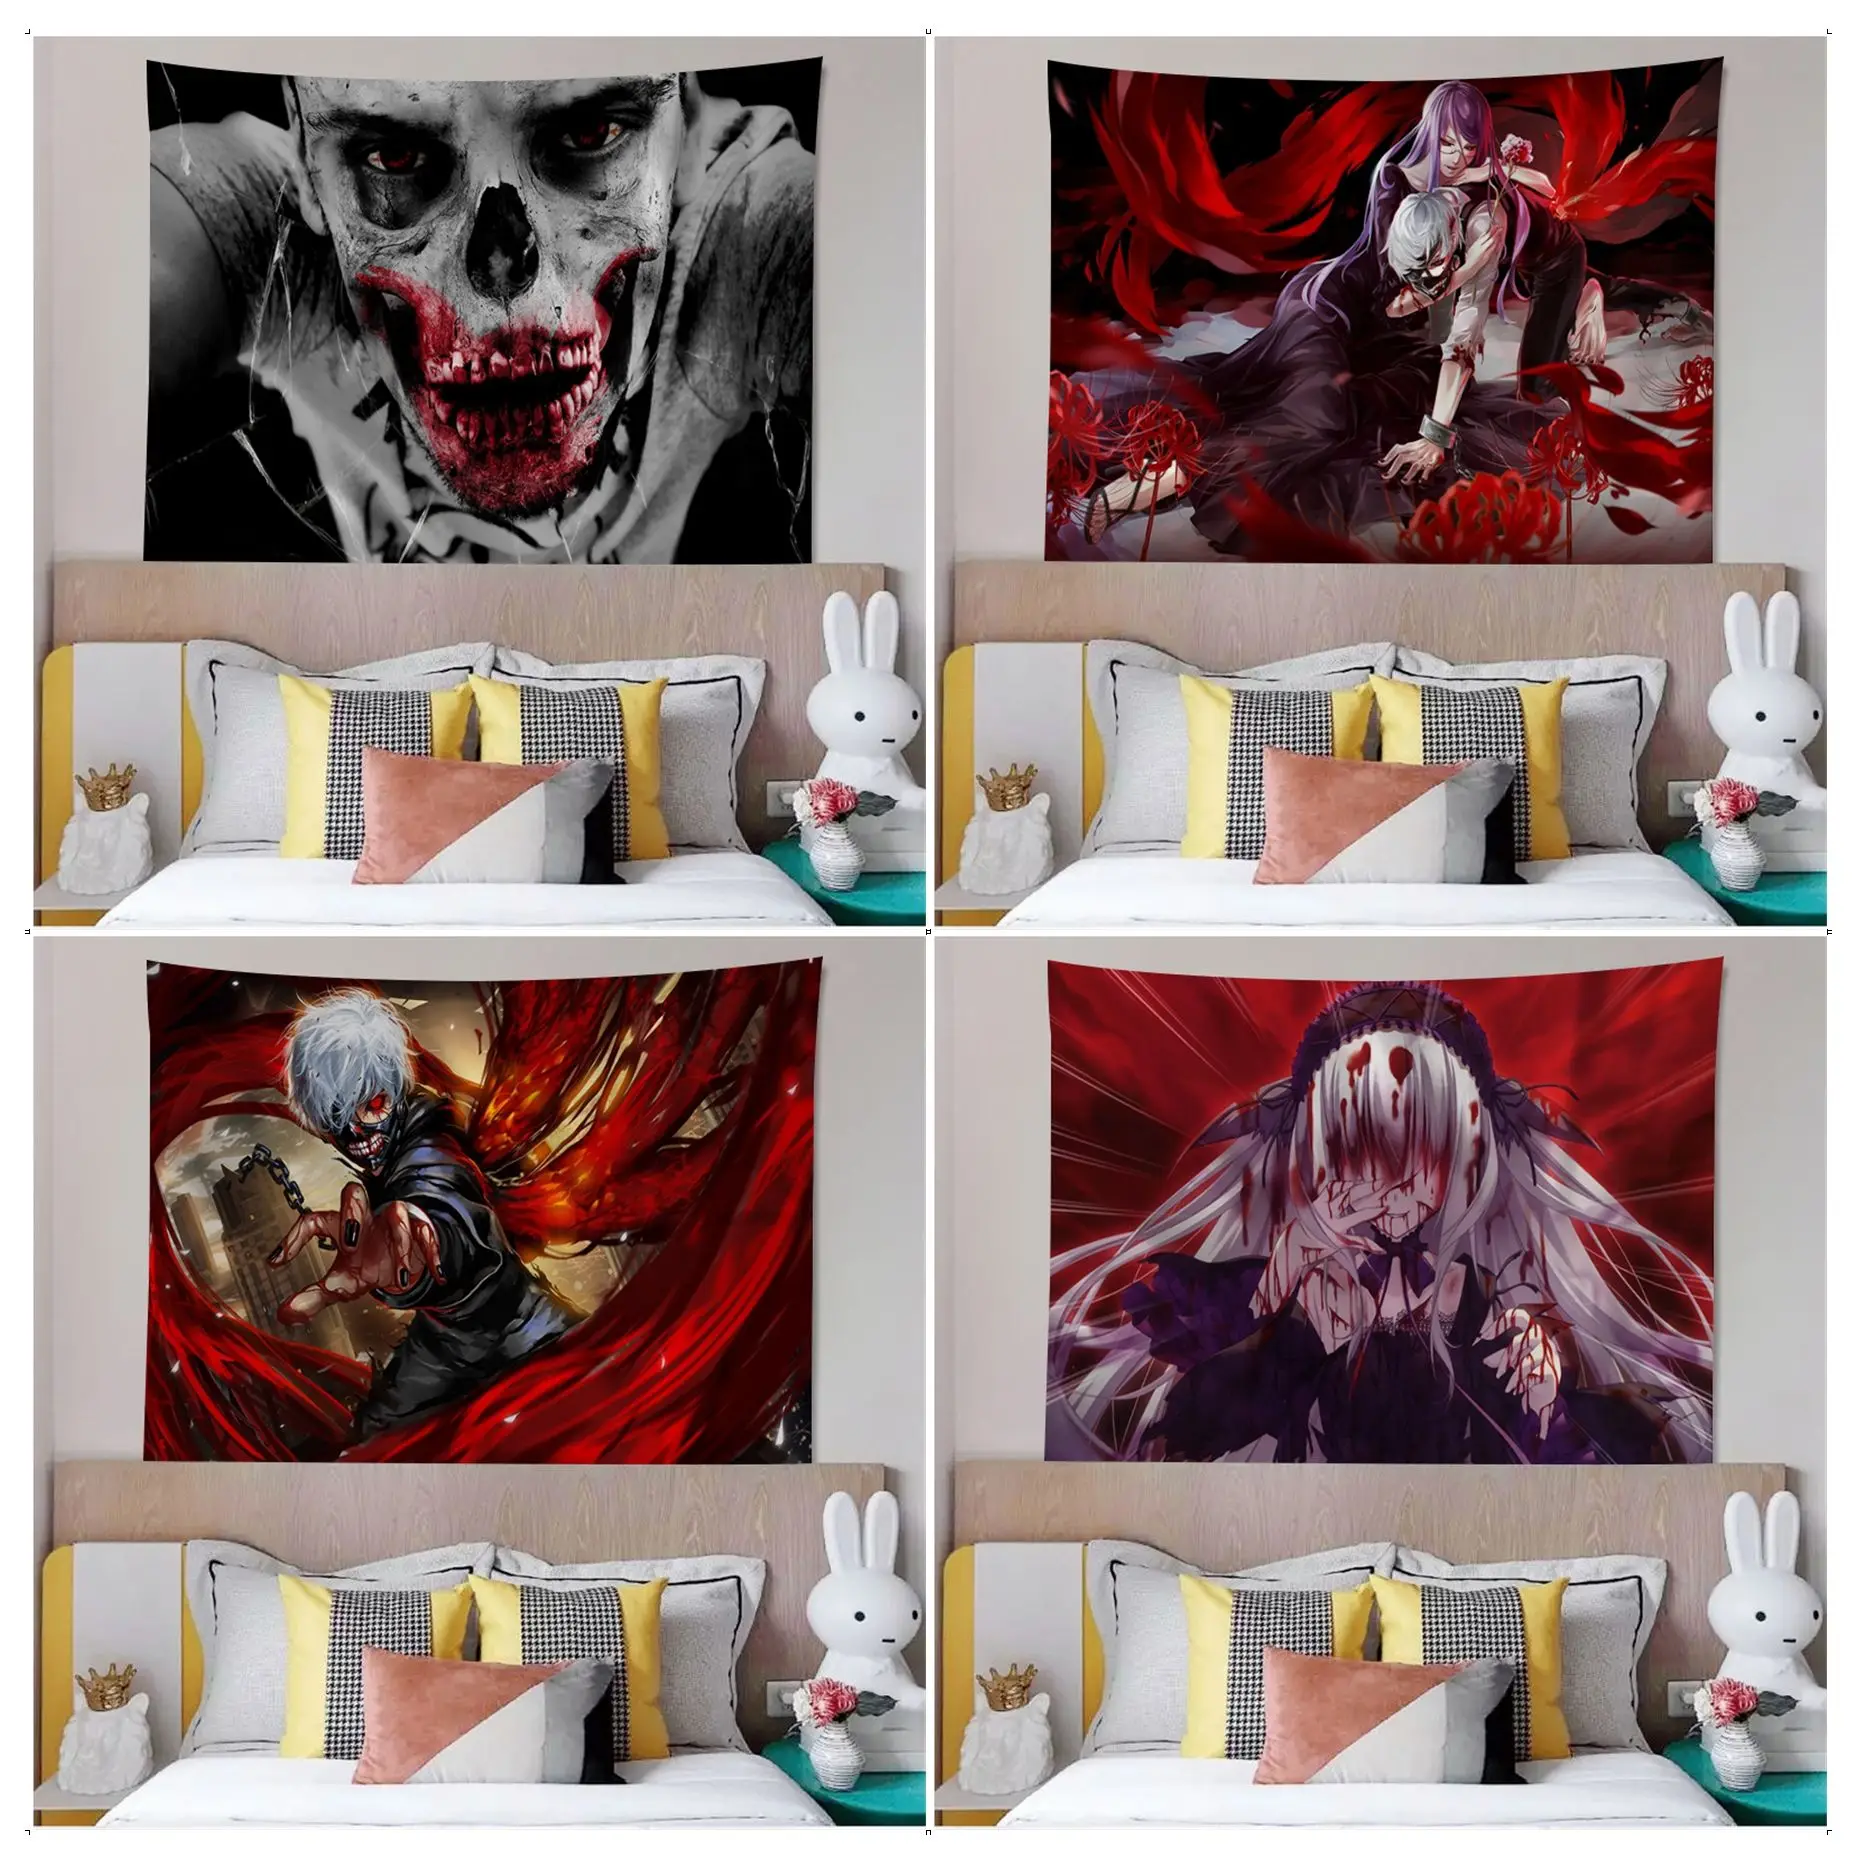 

Horror Bloody Anime Hanging Bohemian Tapestry Hanging Tarot Hippie Wall Rugs Dorm Wall Hanging Sheets